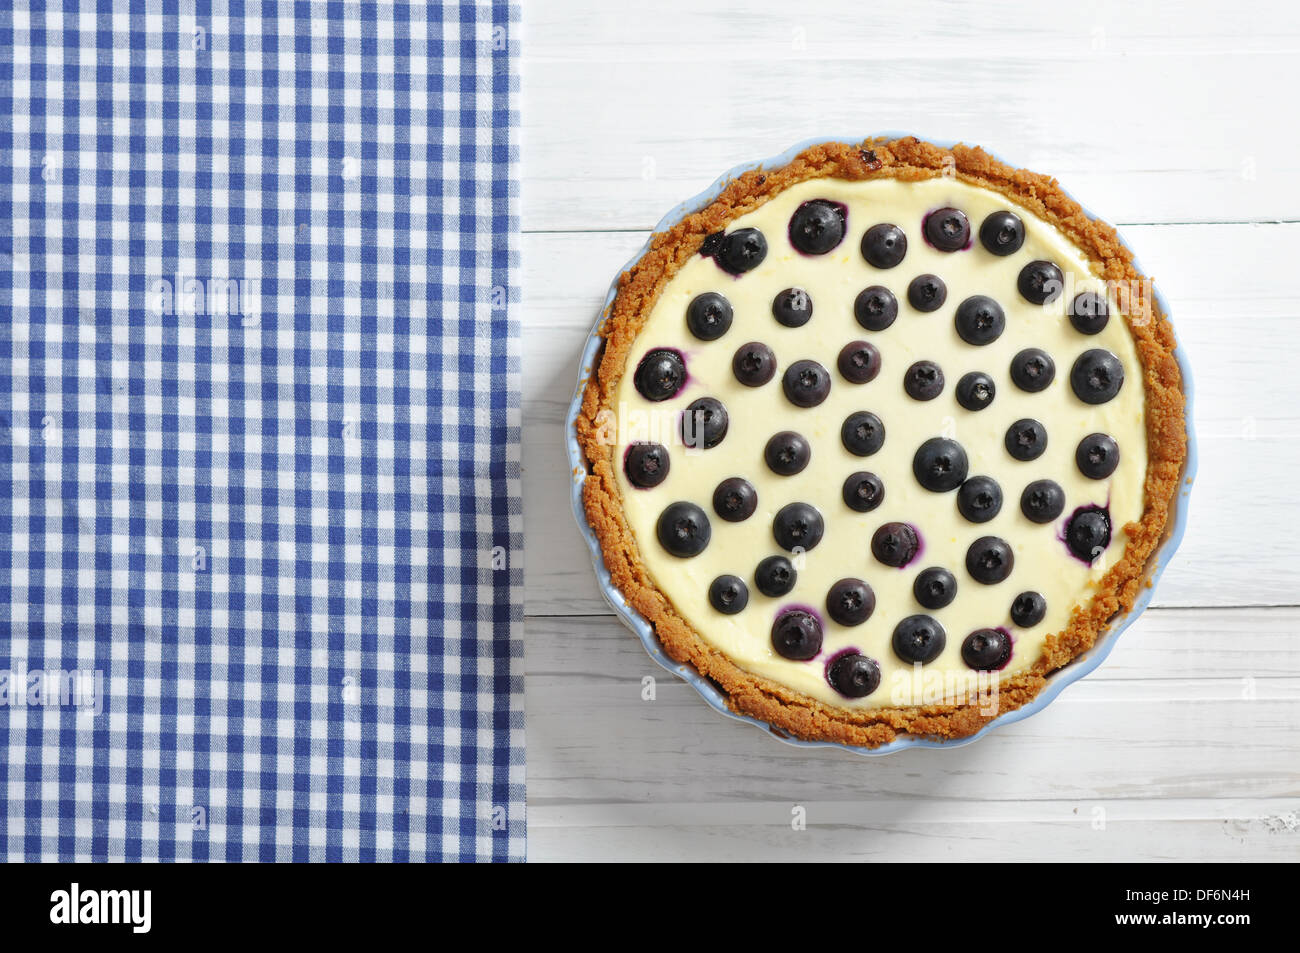 Blueberry tart on checkered background. Top view. Stock Photo